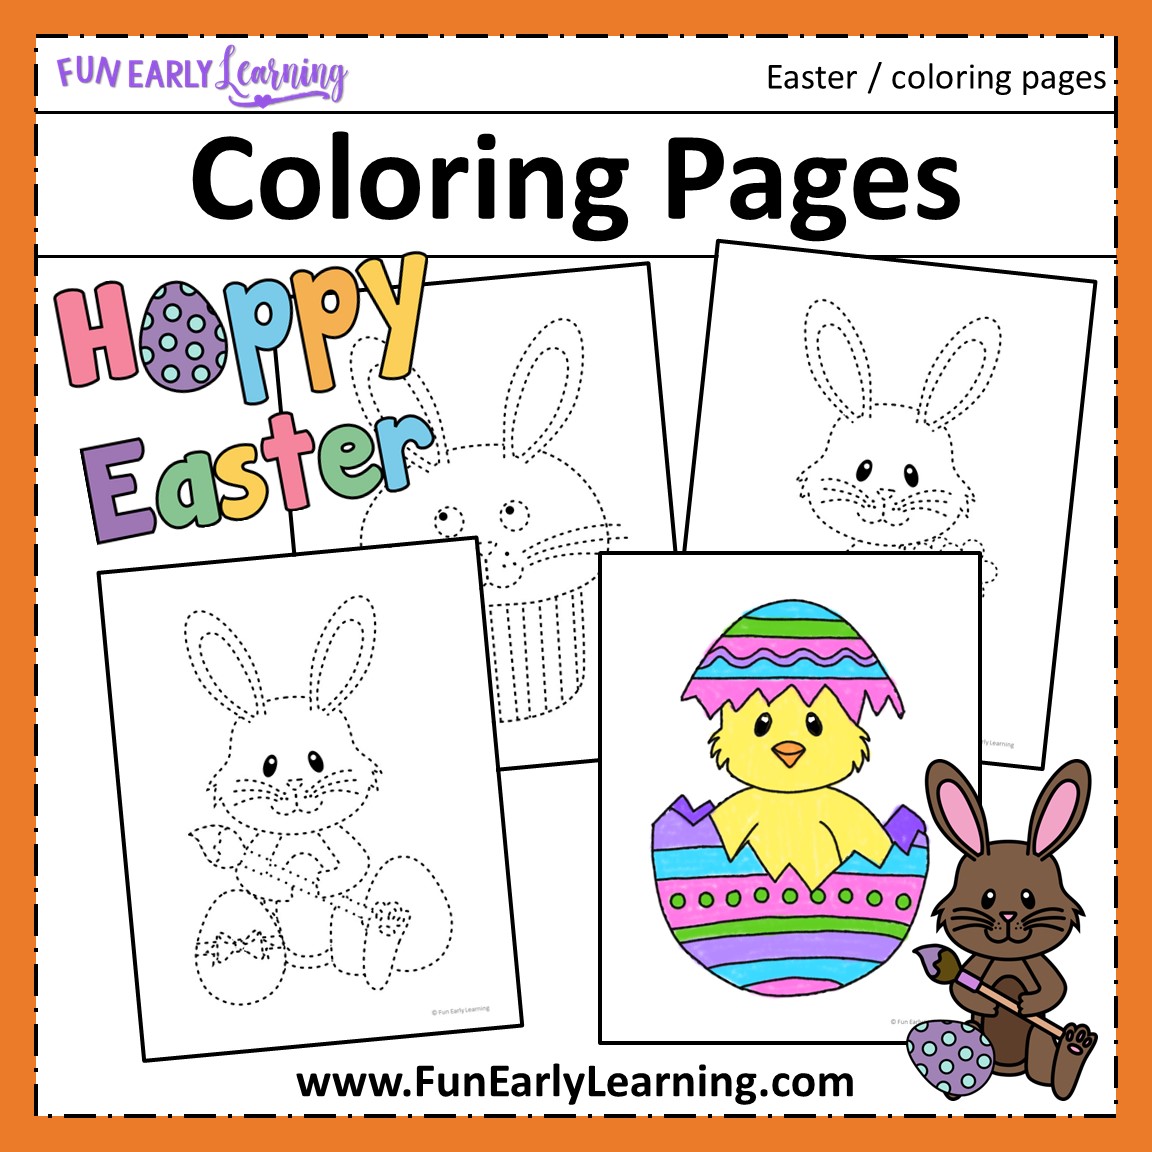 coloring pages printable for preschoolers